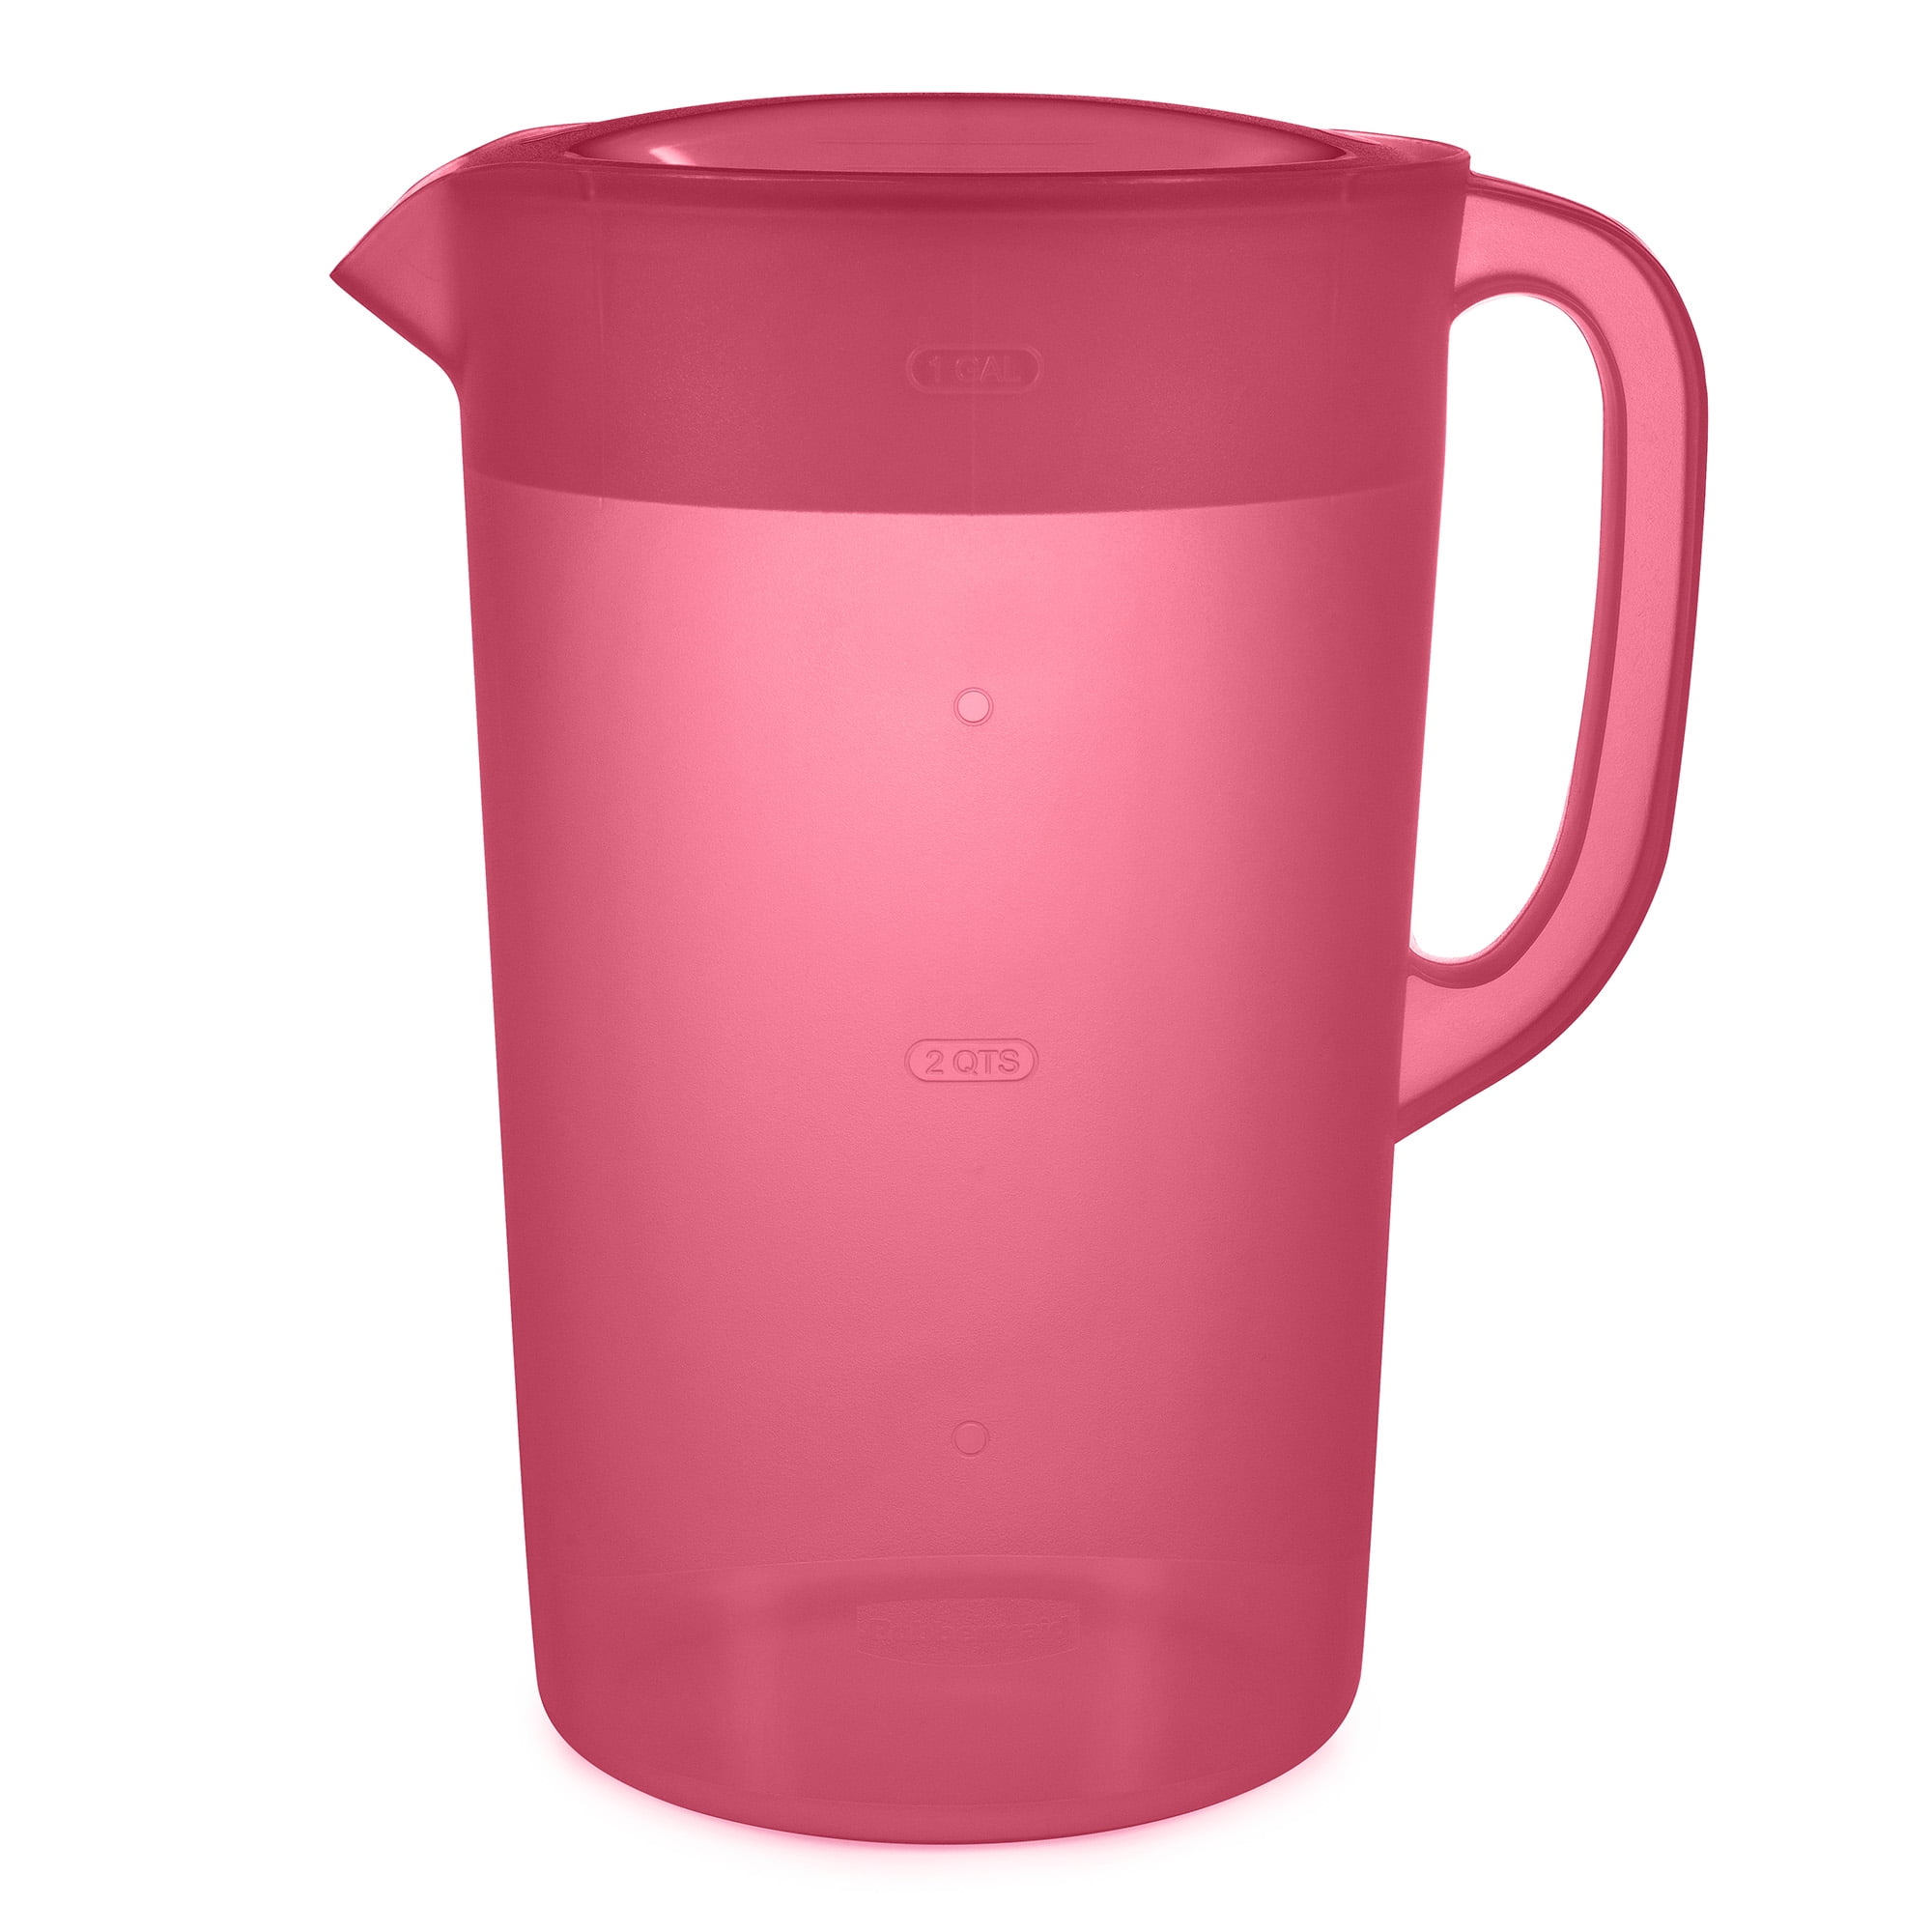 The Rubbermaid 1-gallon pitcher: holding a lifetime of Tang